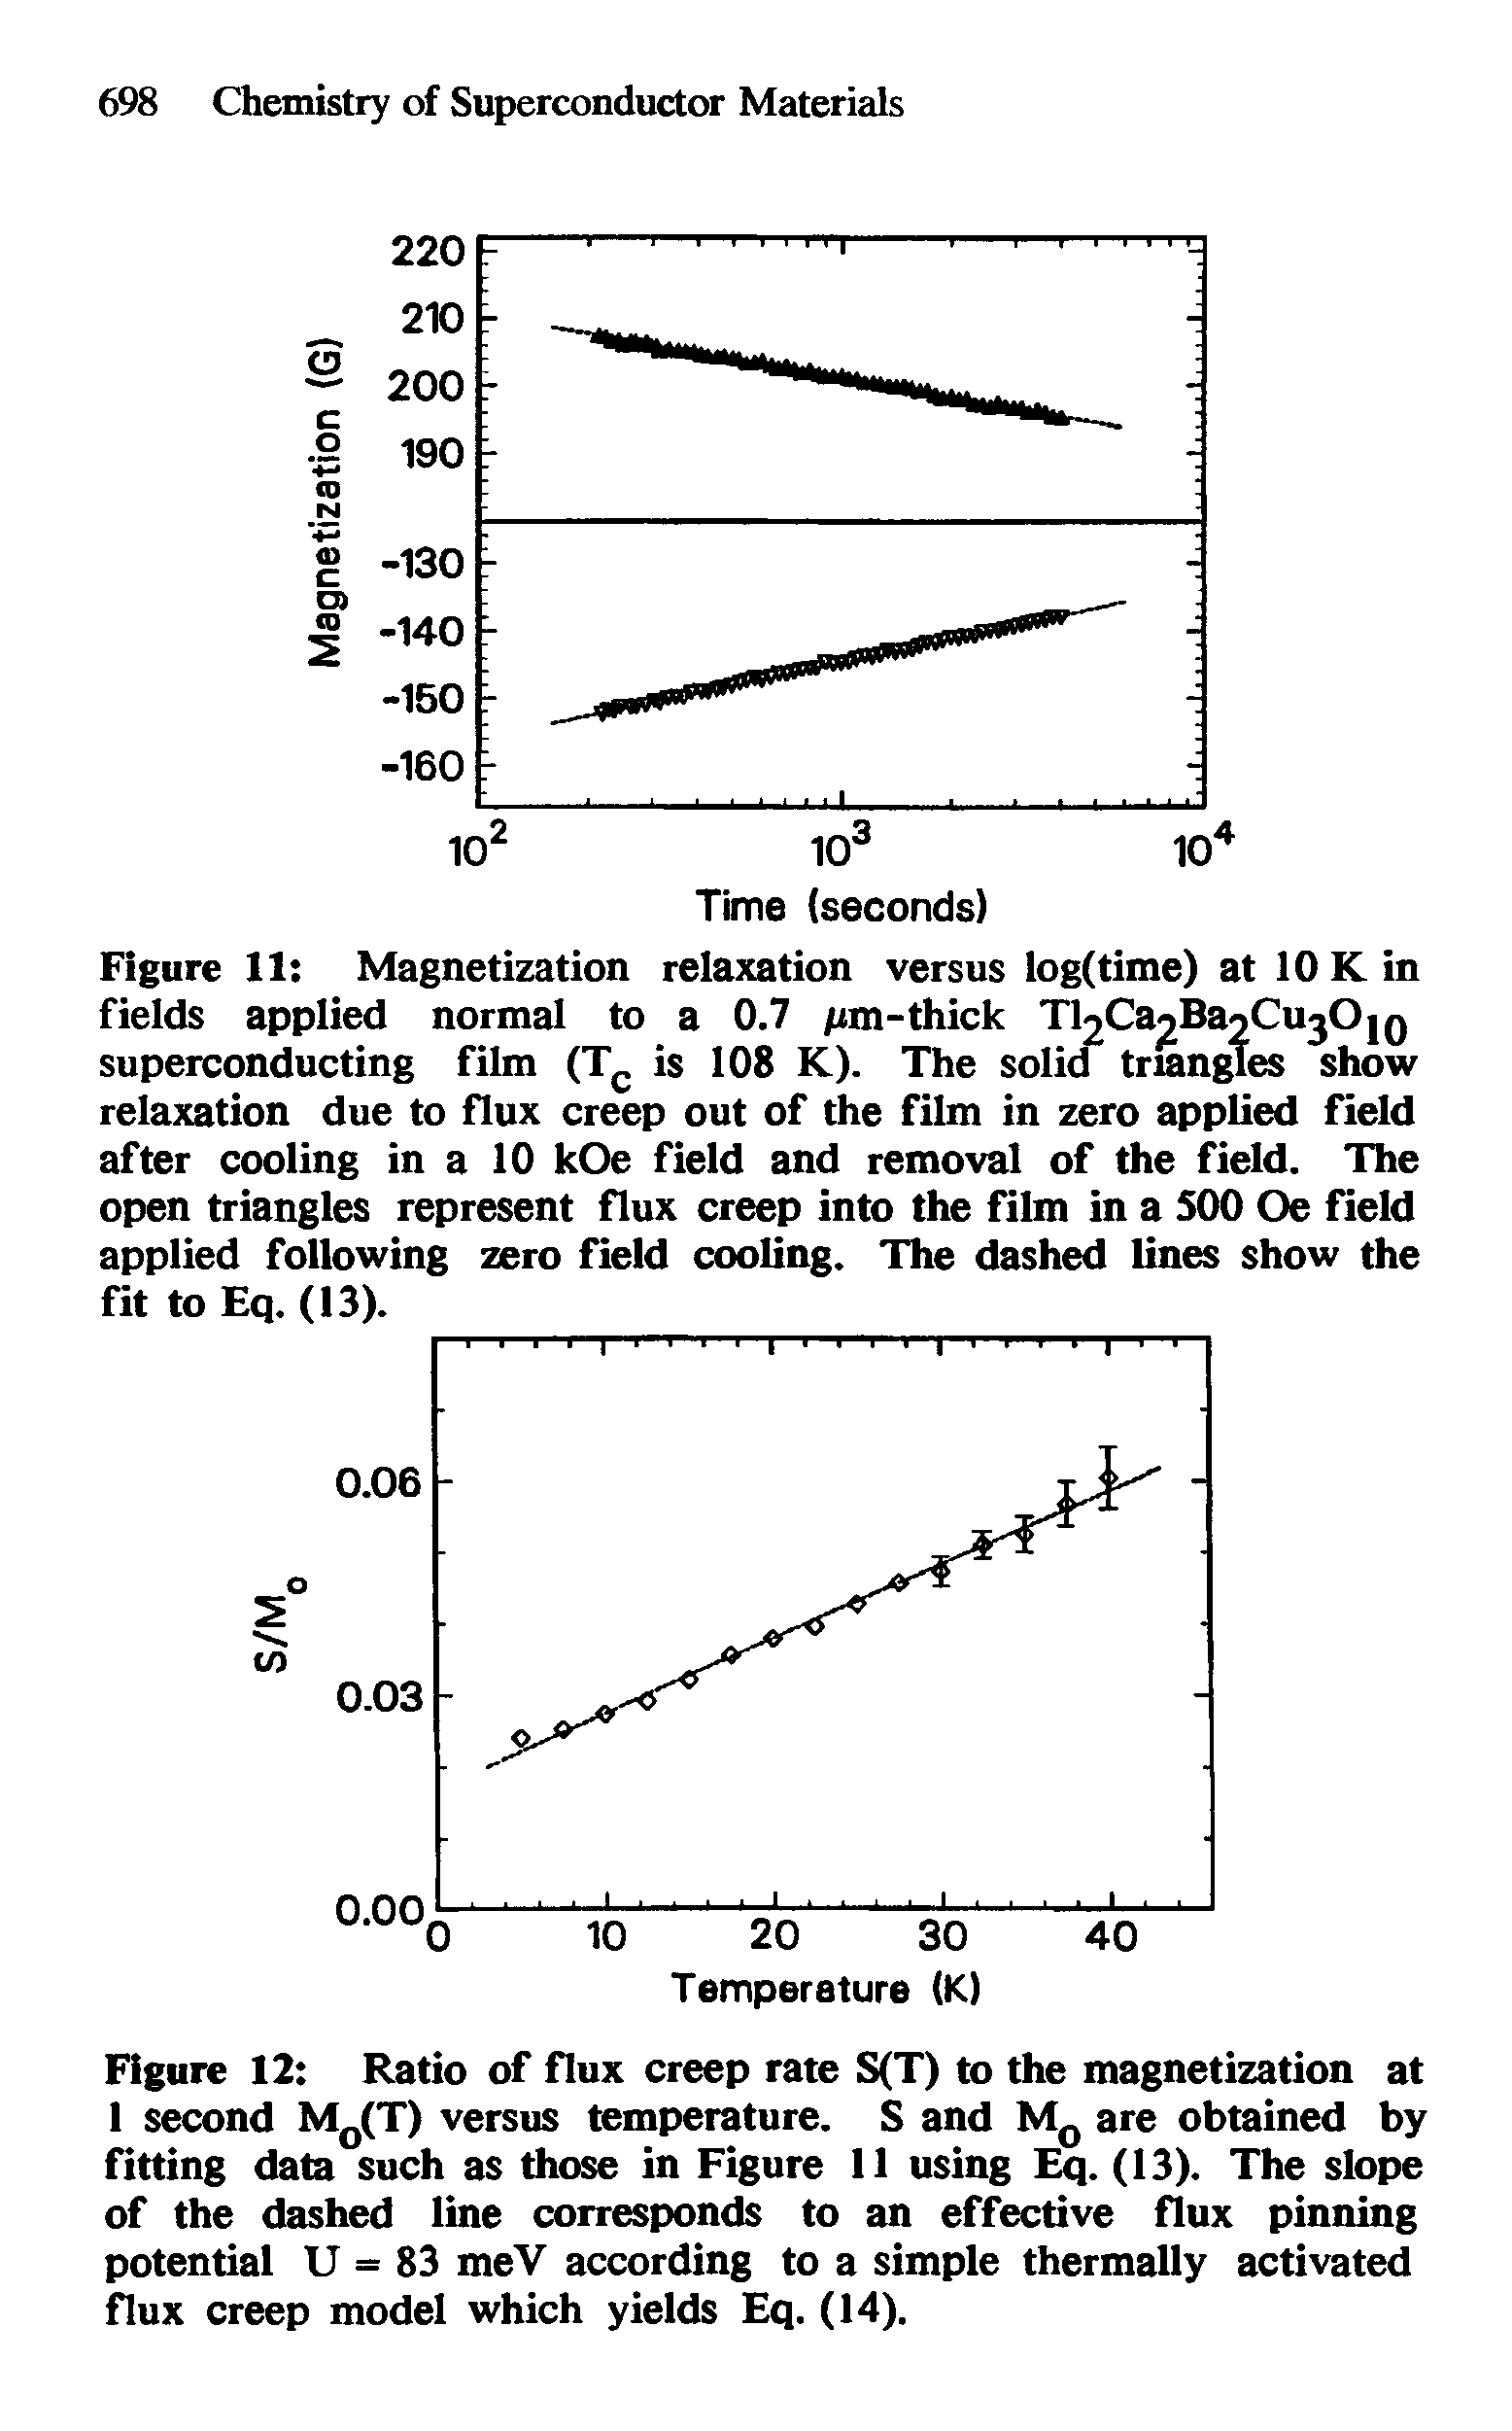 Figure 11 Magnetization relaxation versus log(time) at 10 K in fields applied normal to a 0.7 /un-thick T Ca BaoCujOjQ superconducting film (Tc is 108 K). The solid triangles show relaxation due to flux creep out of the film in zero applied field after cooling in a 10 kOe field and removal of the field. The open triangles represent flux creep into the film in a S00 Oe field applied following zero field cooling. The dashed lines show the fit to Eq. (13).